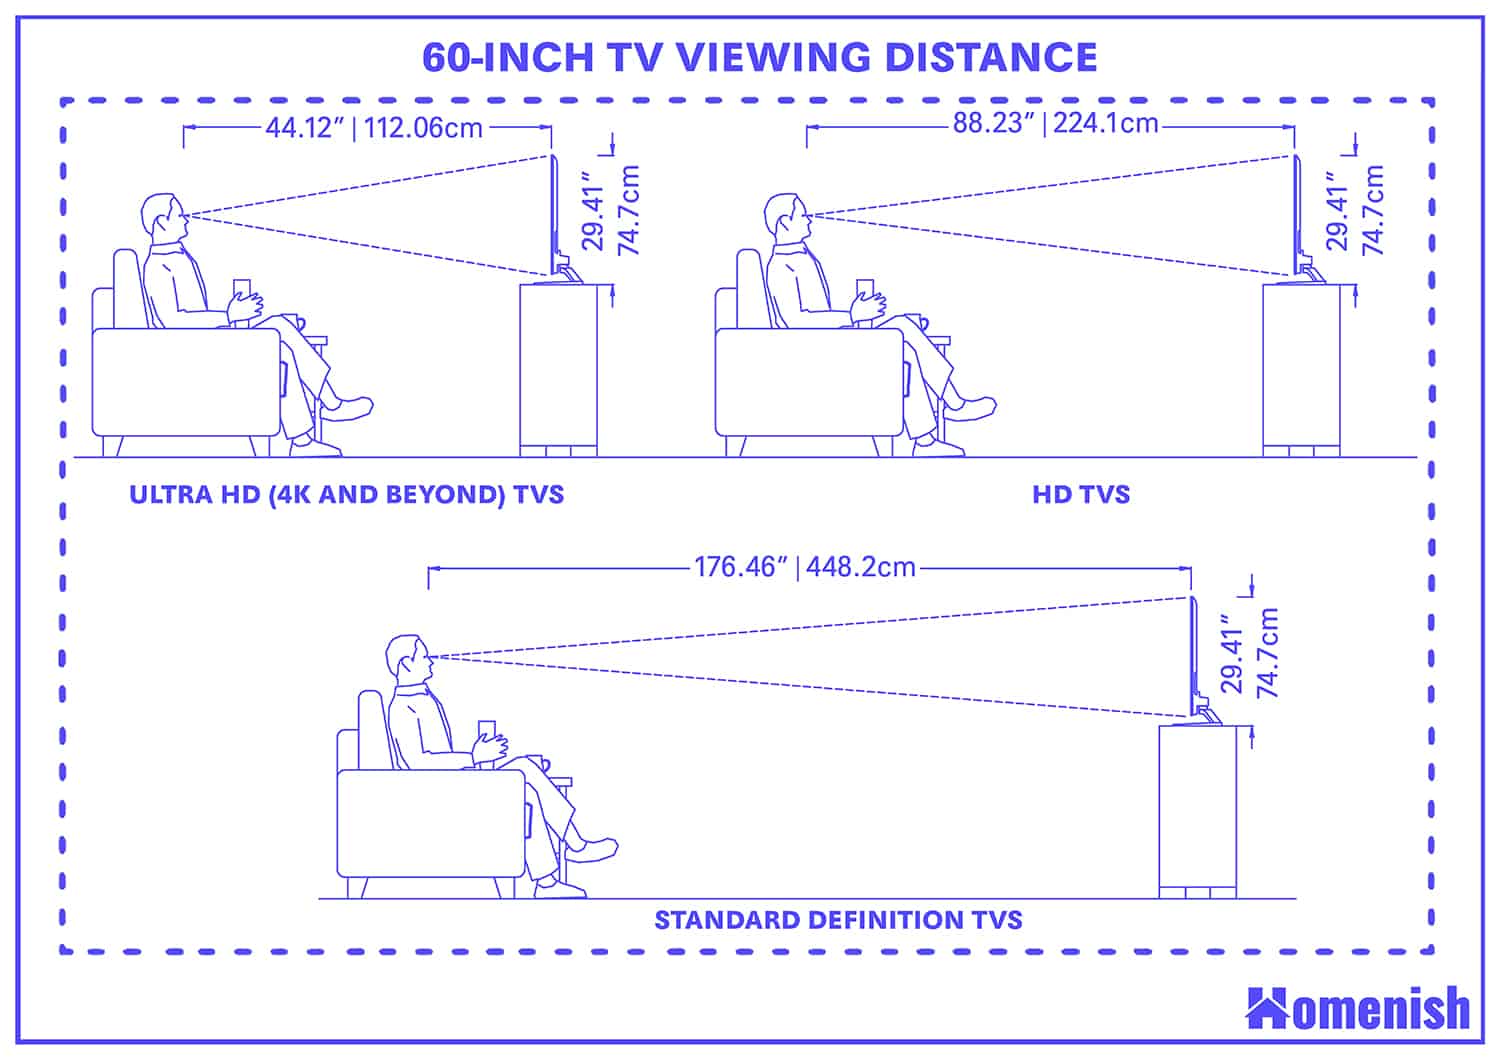 60-inch TV Viewing Distance